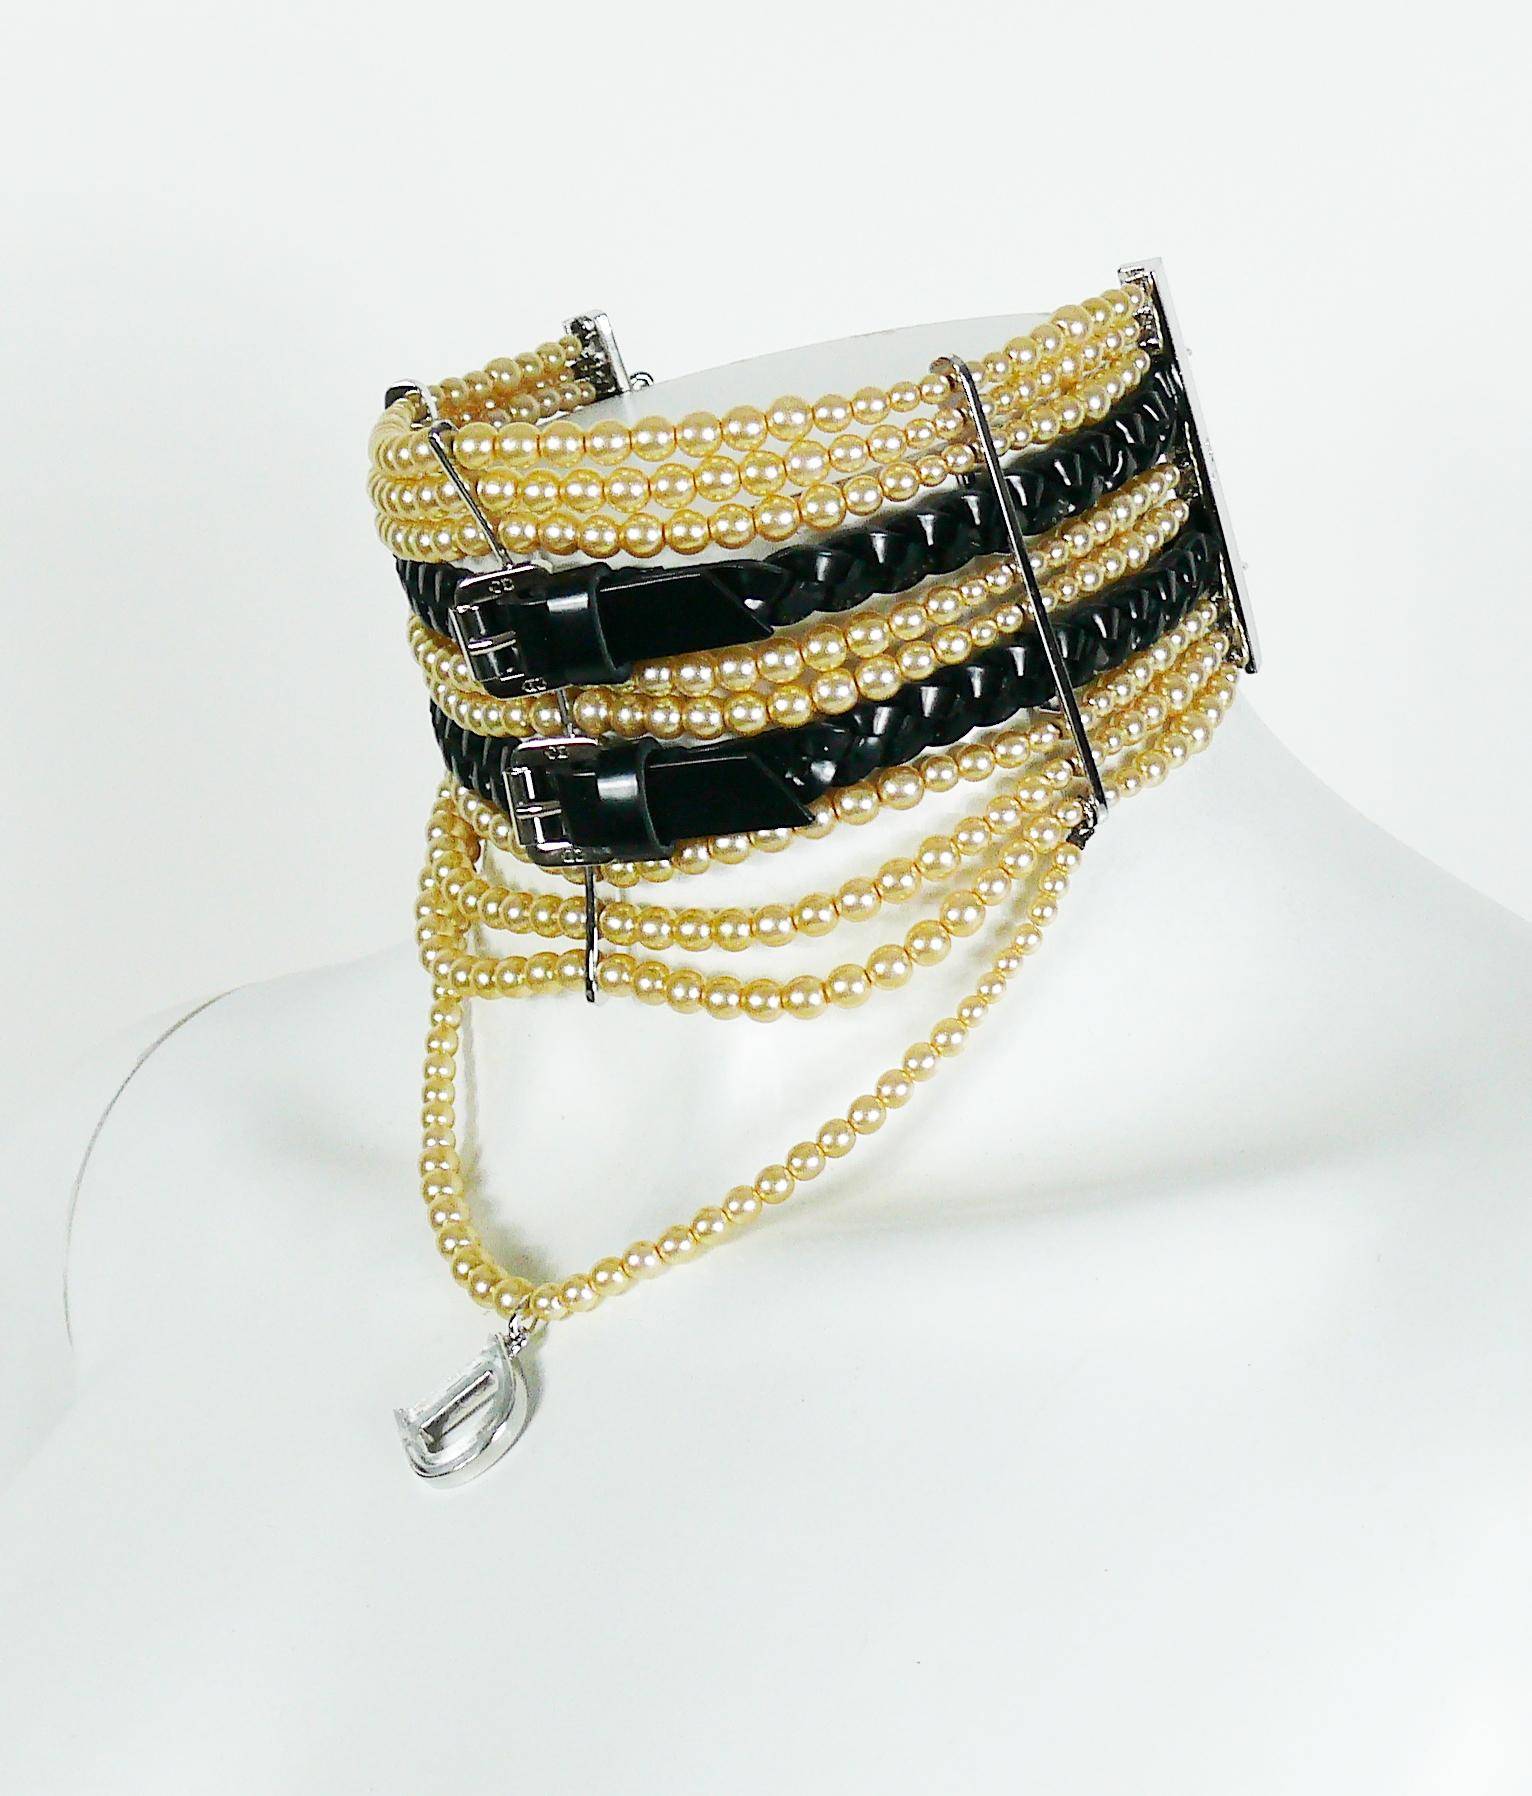 Christian Dior by John Galliano Masai Beaded Leather Buckle Choker Necklace 2